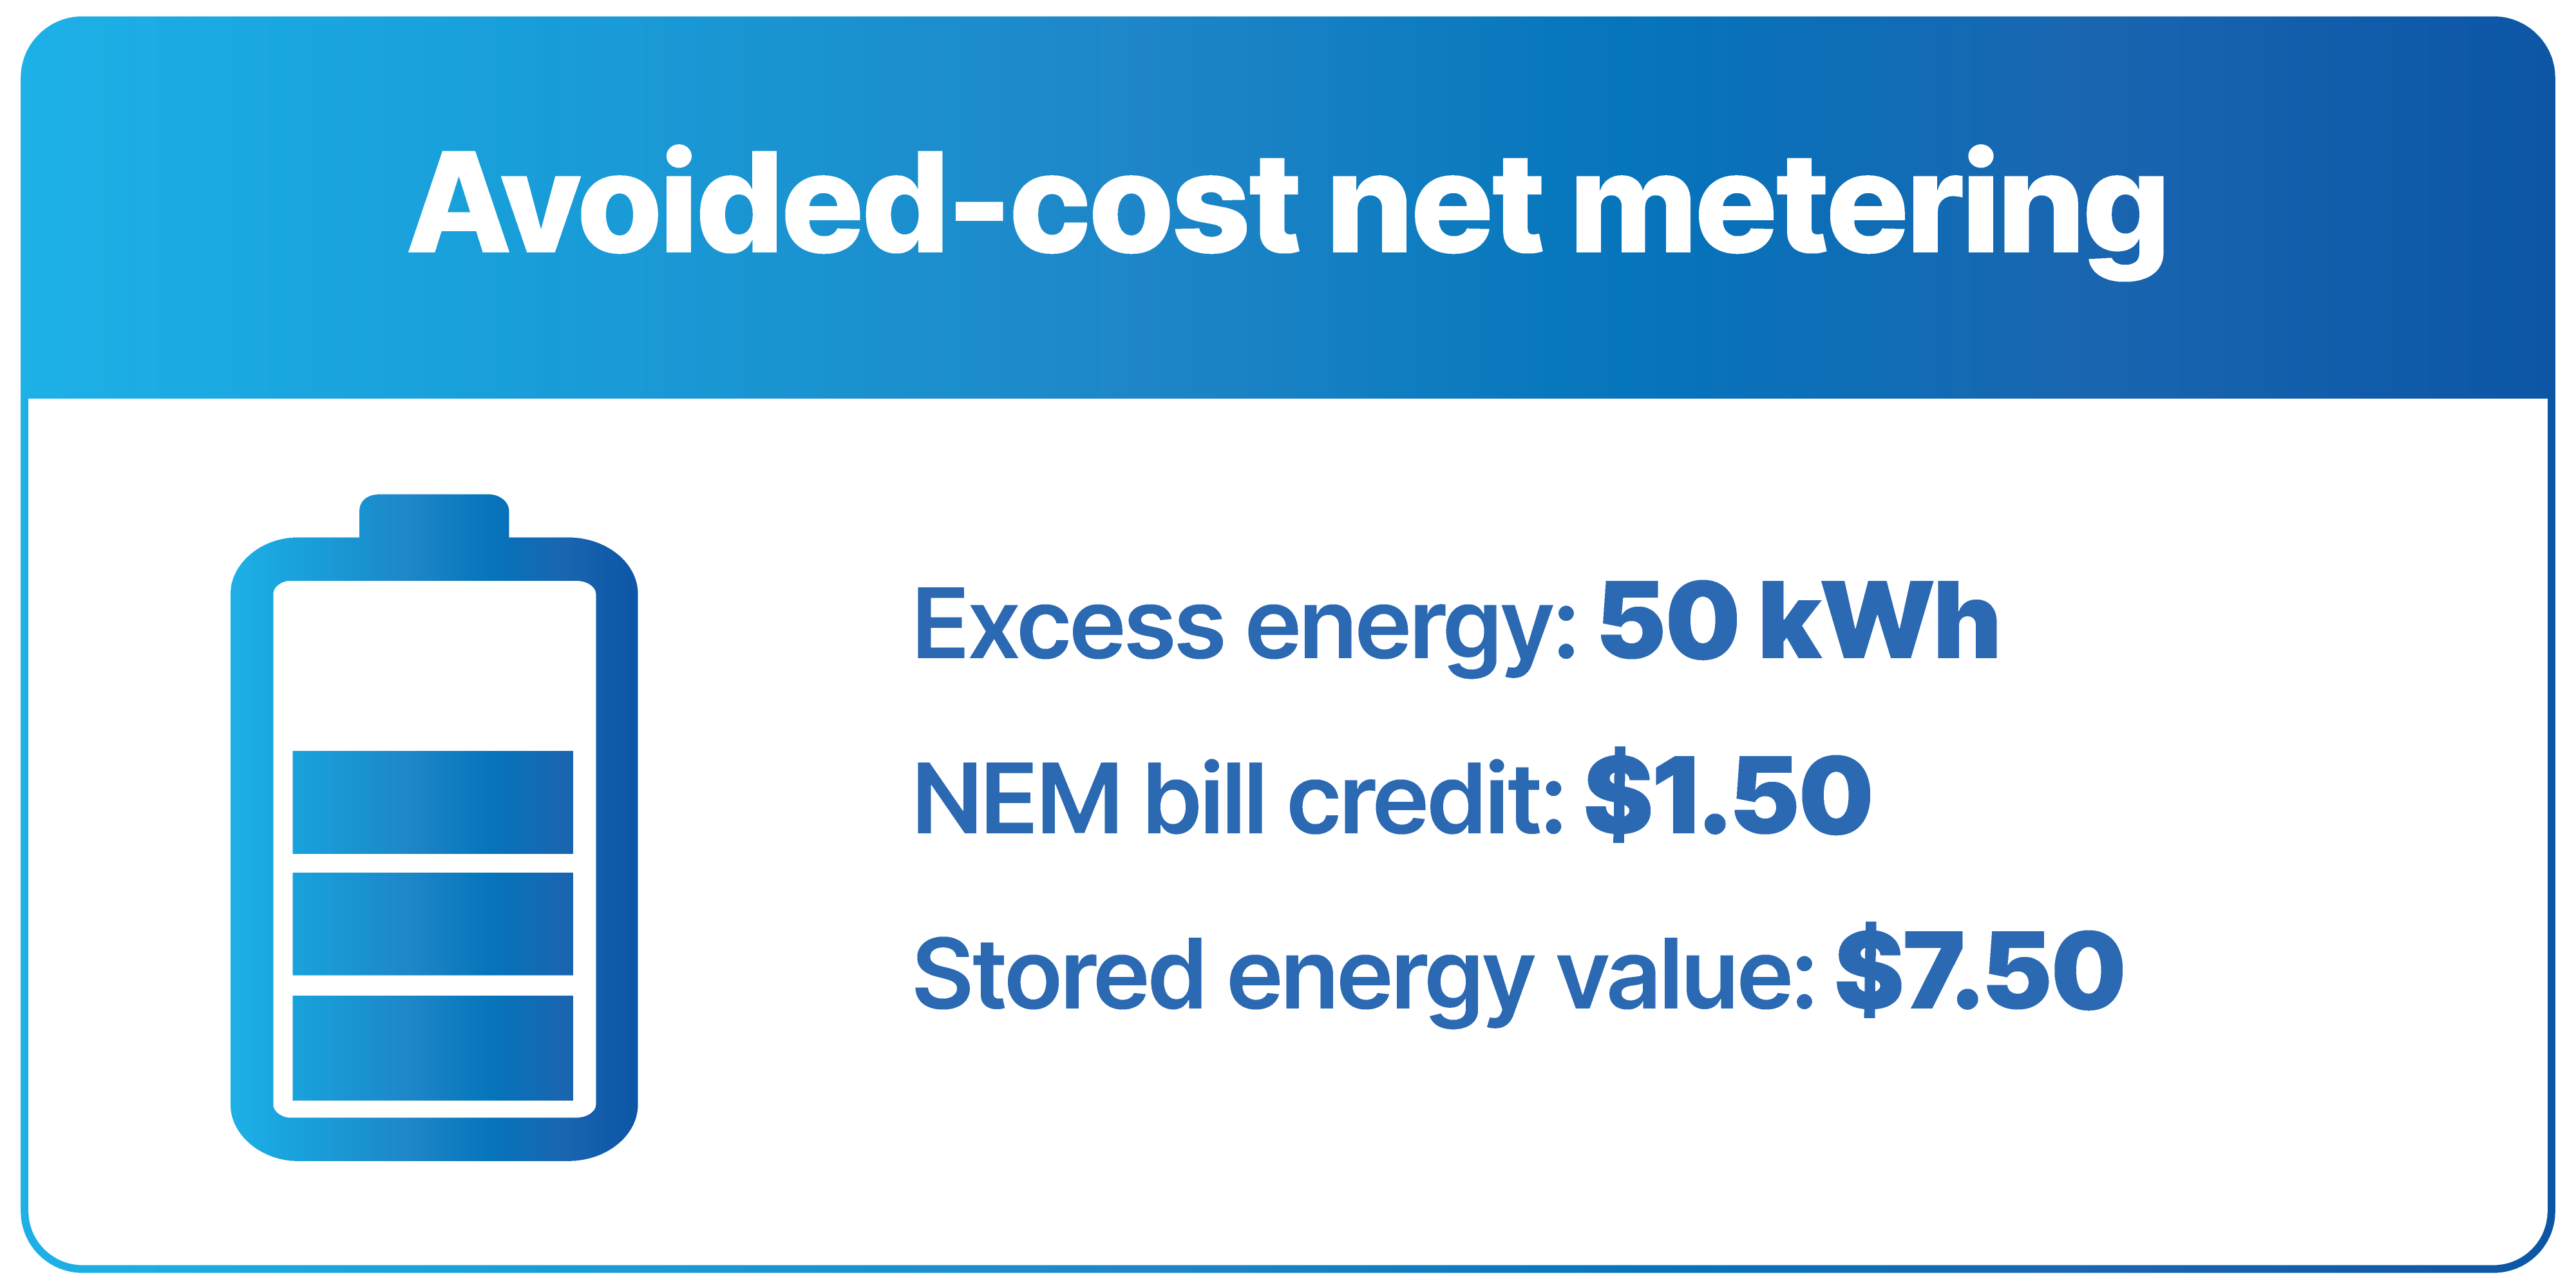 In this example, 50 kWh of energy sold to the utility through avoided-cost net metering would be worth $1.50, 50 kWh of stored energy would be worth $7.50. Batteries can help save more money with avoided-cost net metering.